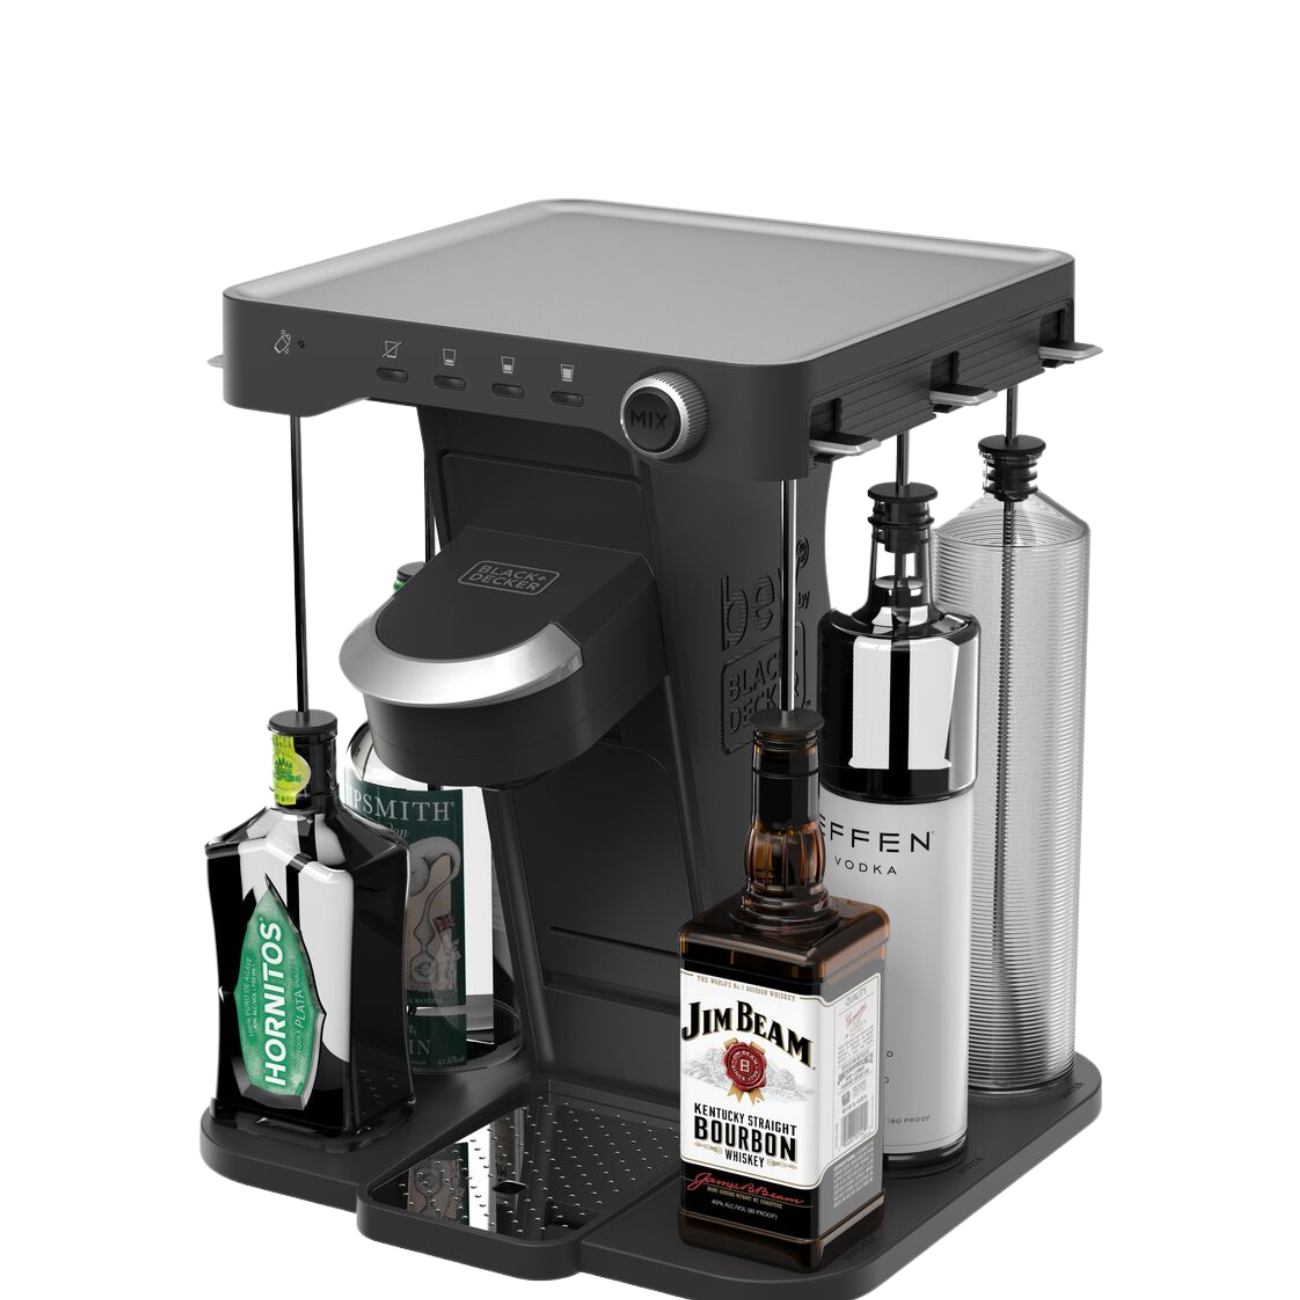 Meet your new personal bartender. Introducing the bev by BLACK+DECKER™, Bartender